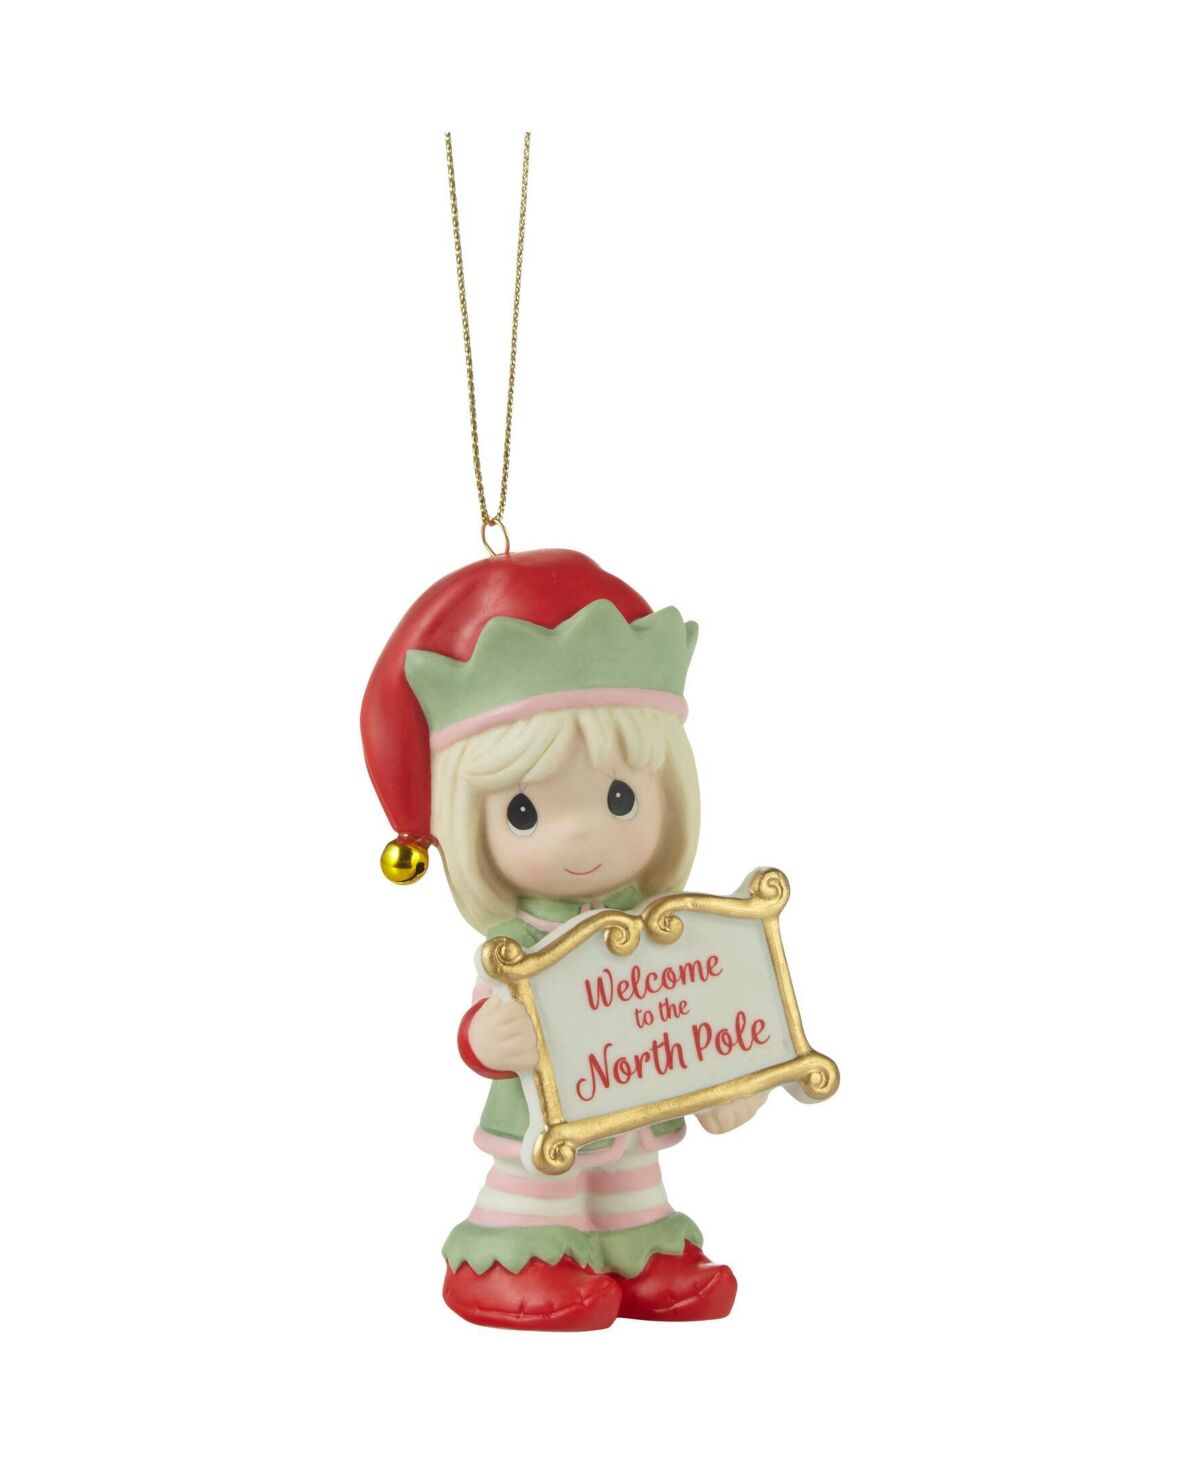 Precious Moments Greetings From The North Pole Annual Elf Bisque Porcelain Ornament - Multicolored